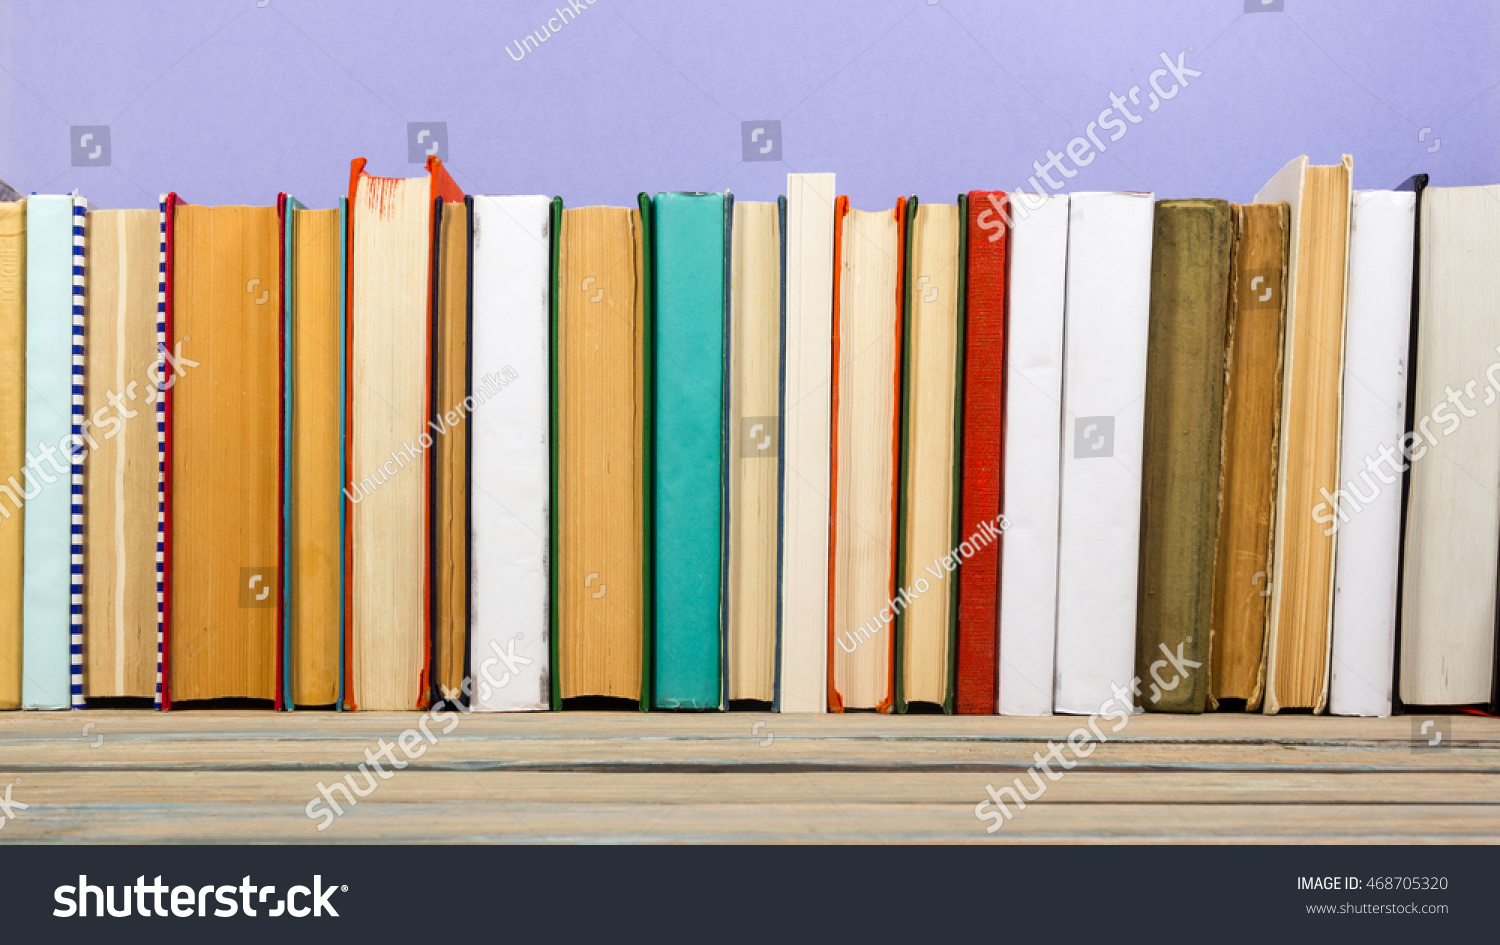 Books on grunge wooden table desk shelf in library. Back to school background with copy space for your ad text. Old hardback   no labels, blank spine #468705320